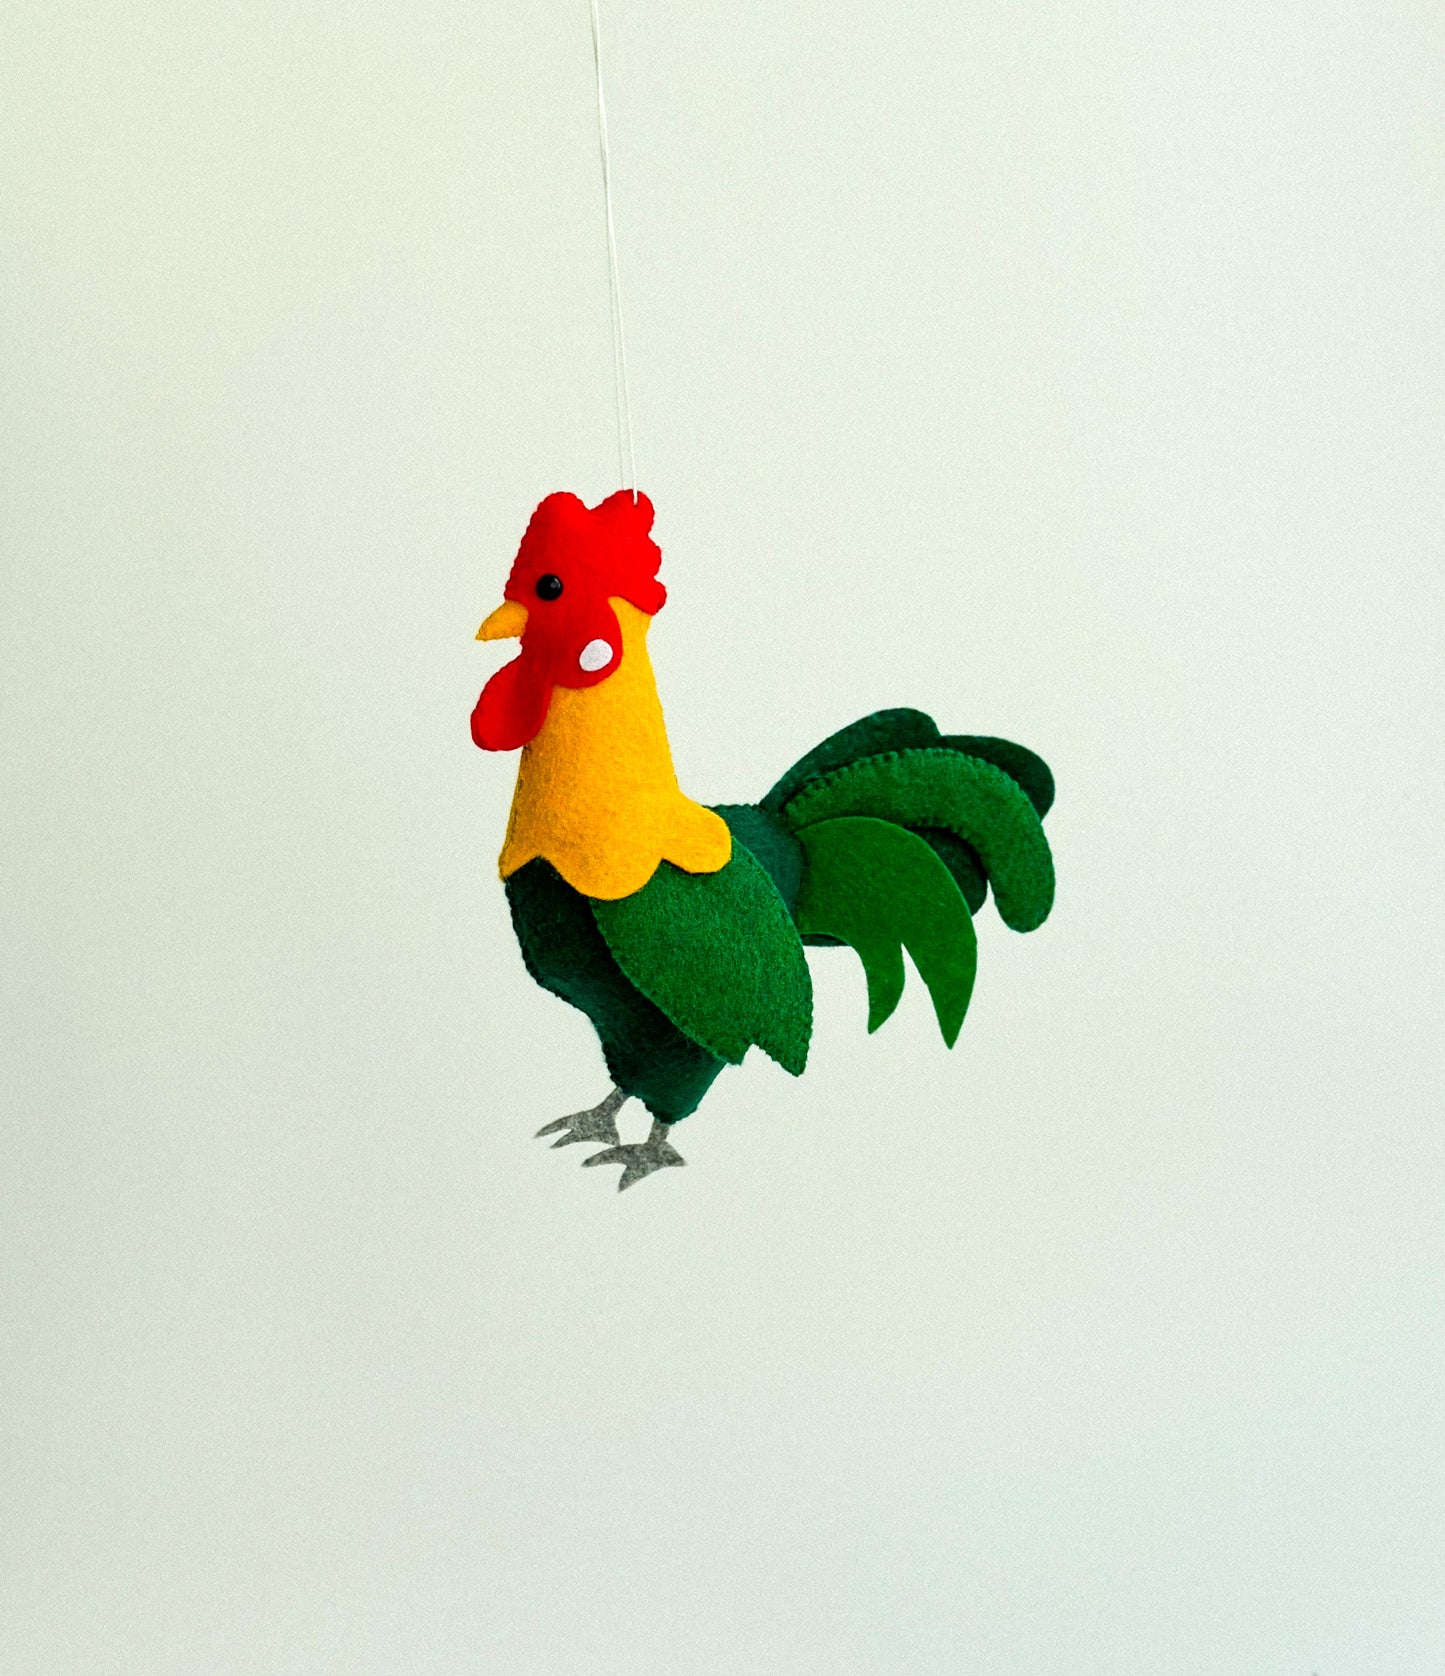 Handcrafted Felt Rooster Ornament